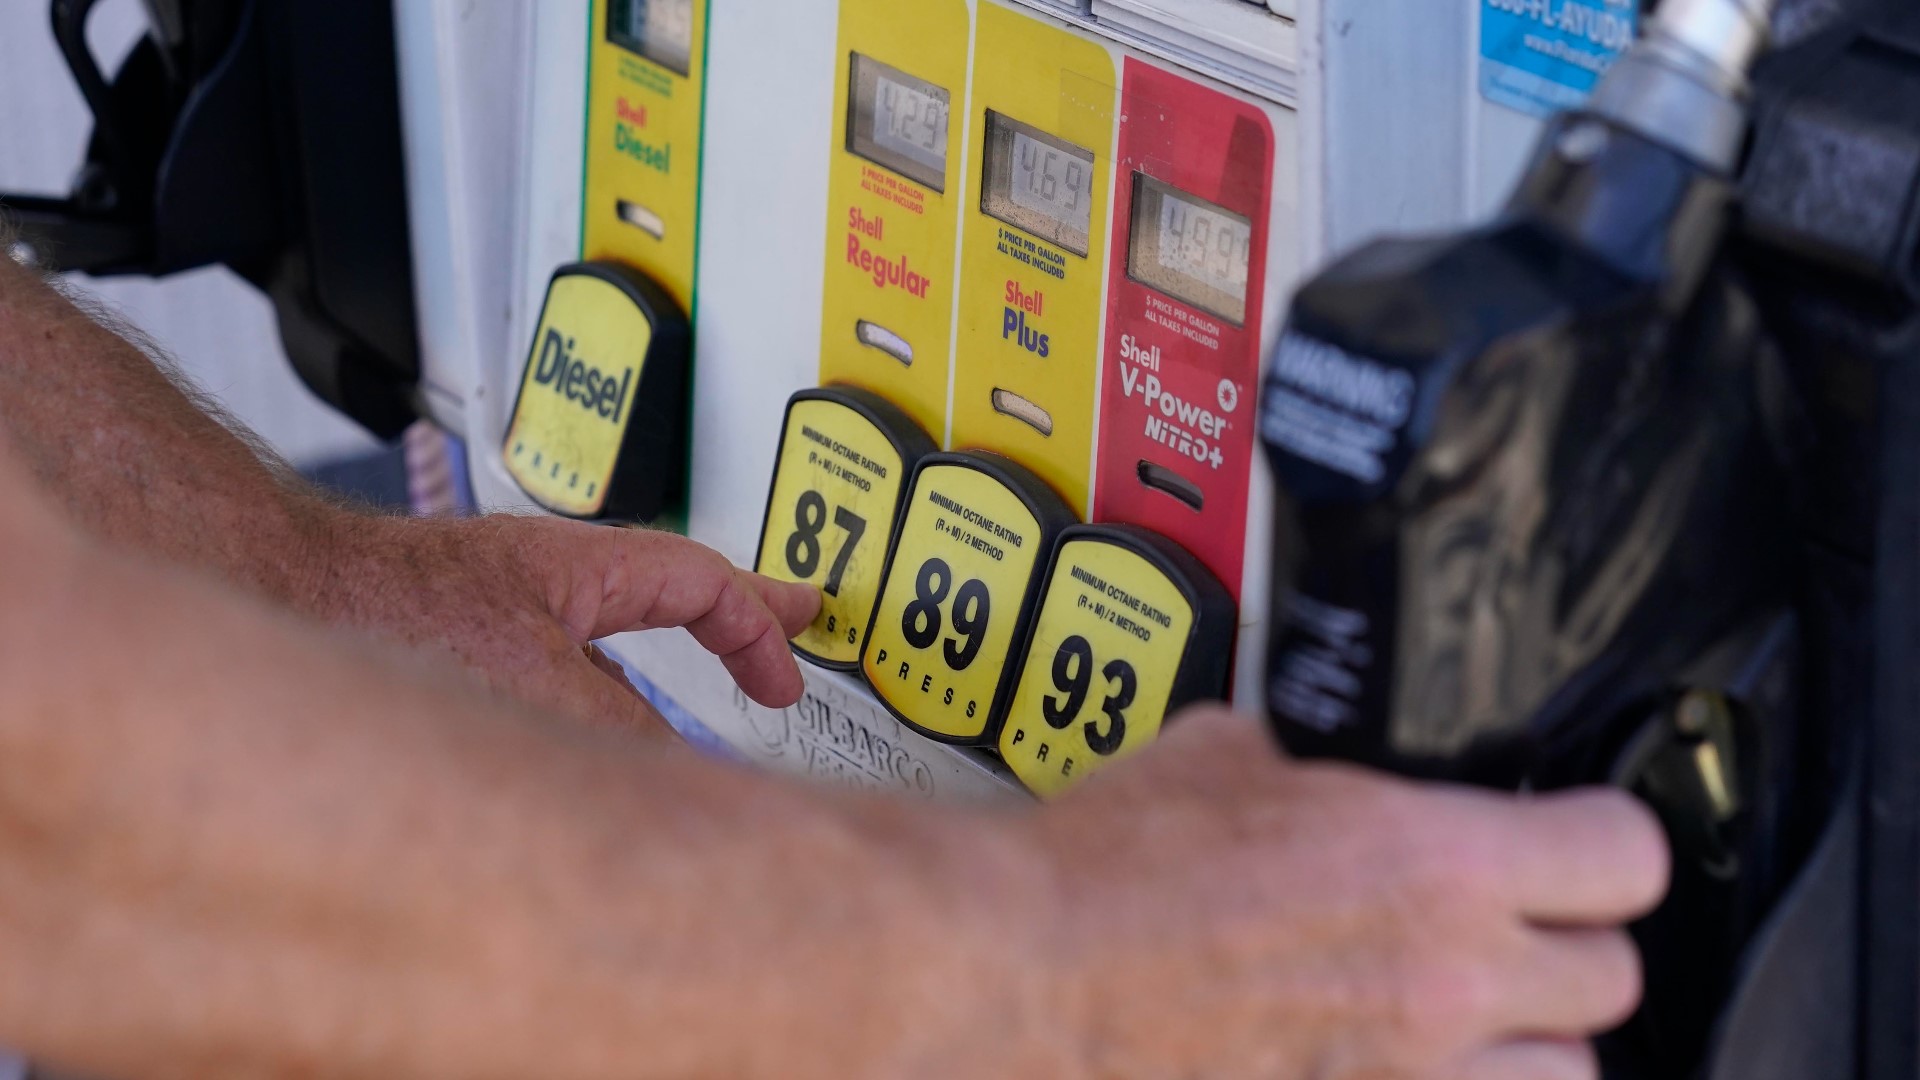 The nationwide average gas price is $4.80 per gallon, while Indiana's average is $4.88.